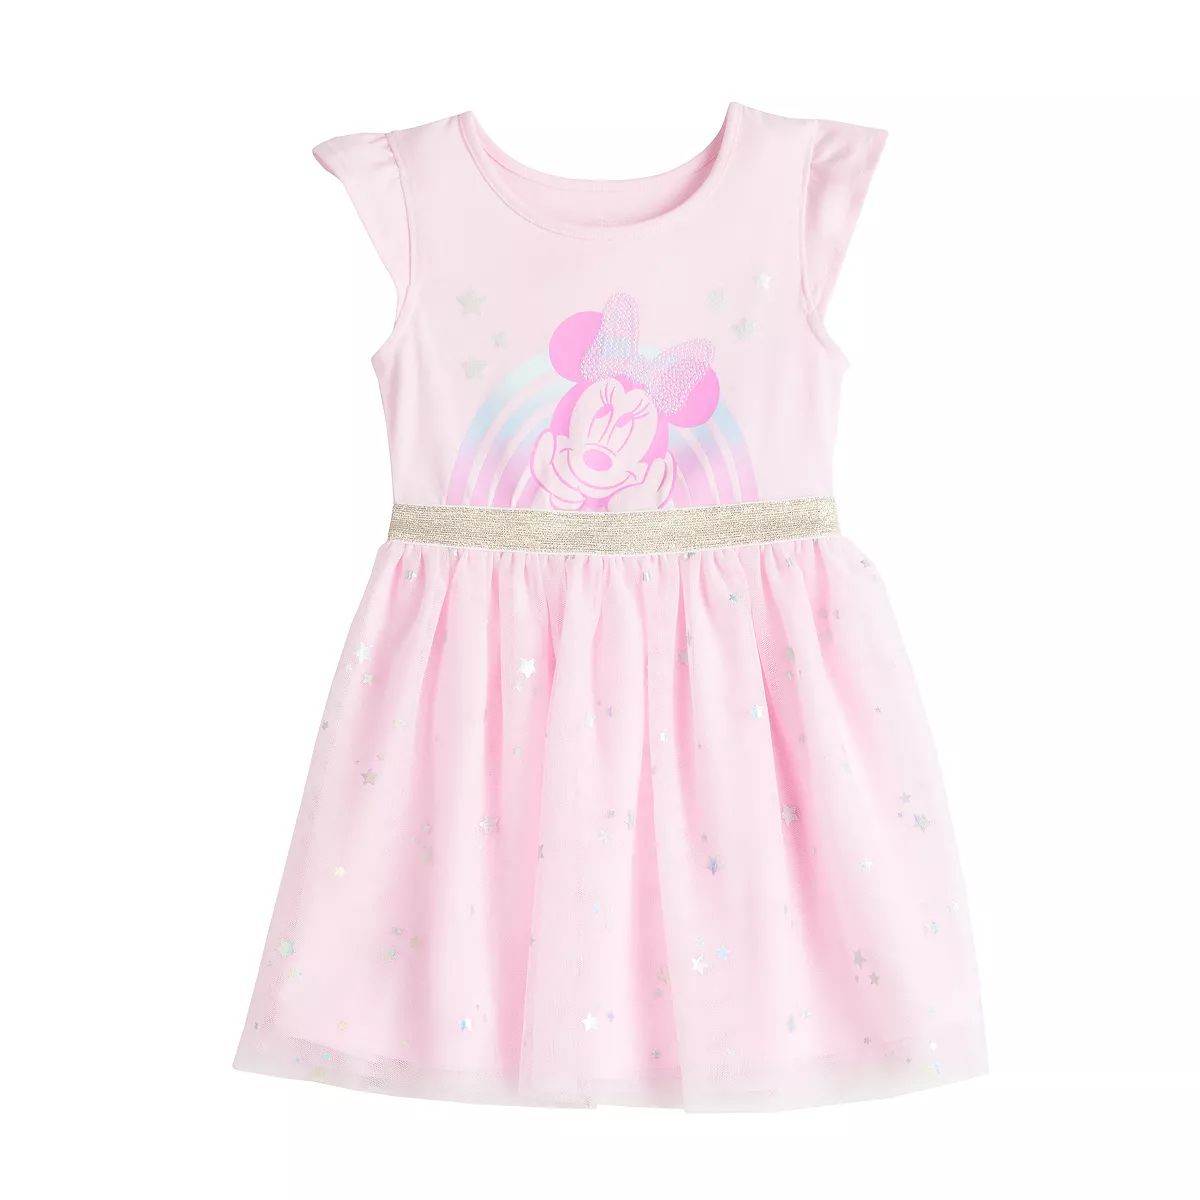 Disney's Minnie Mouse Baby & Toddler Girl Tutu Dress by Jumping Beans® | Kohl's